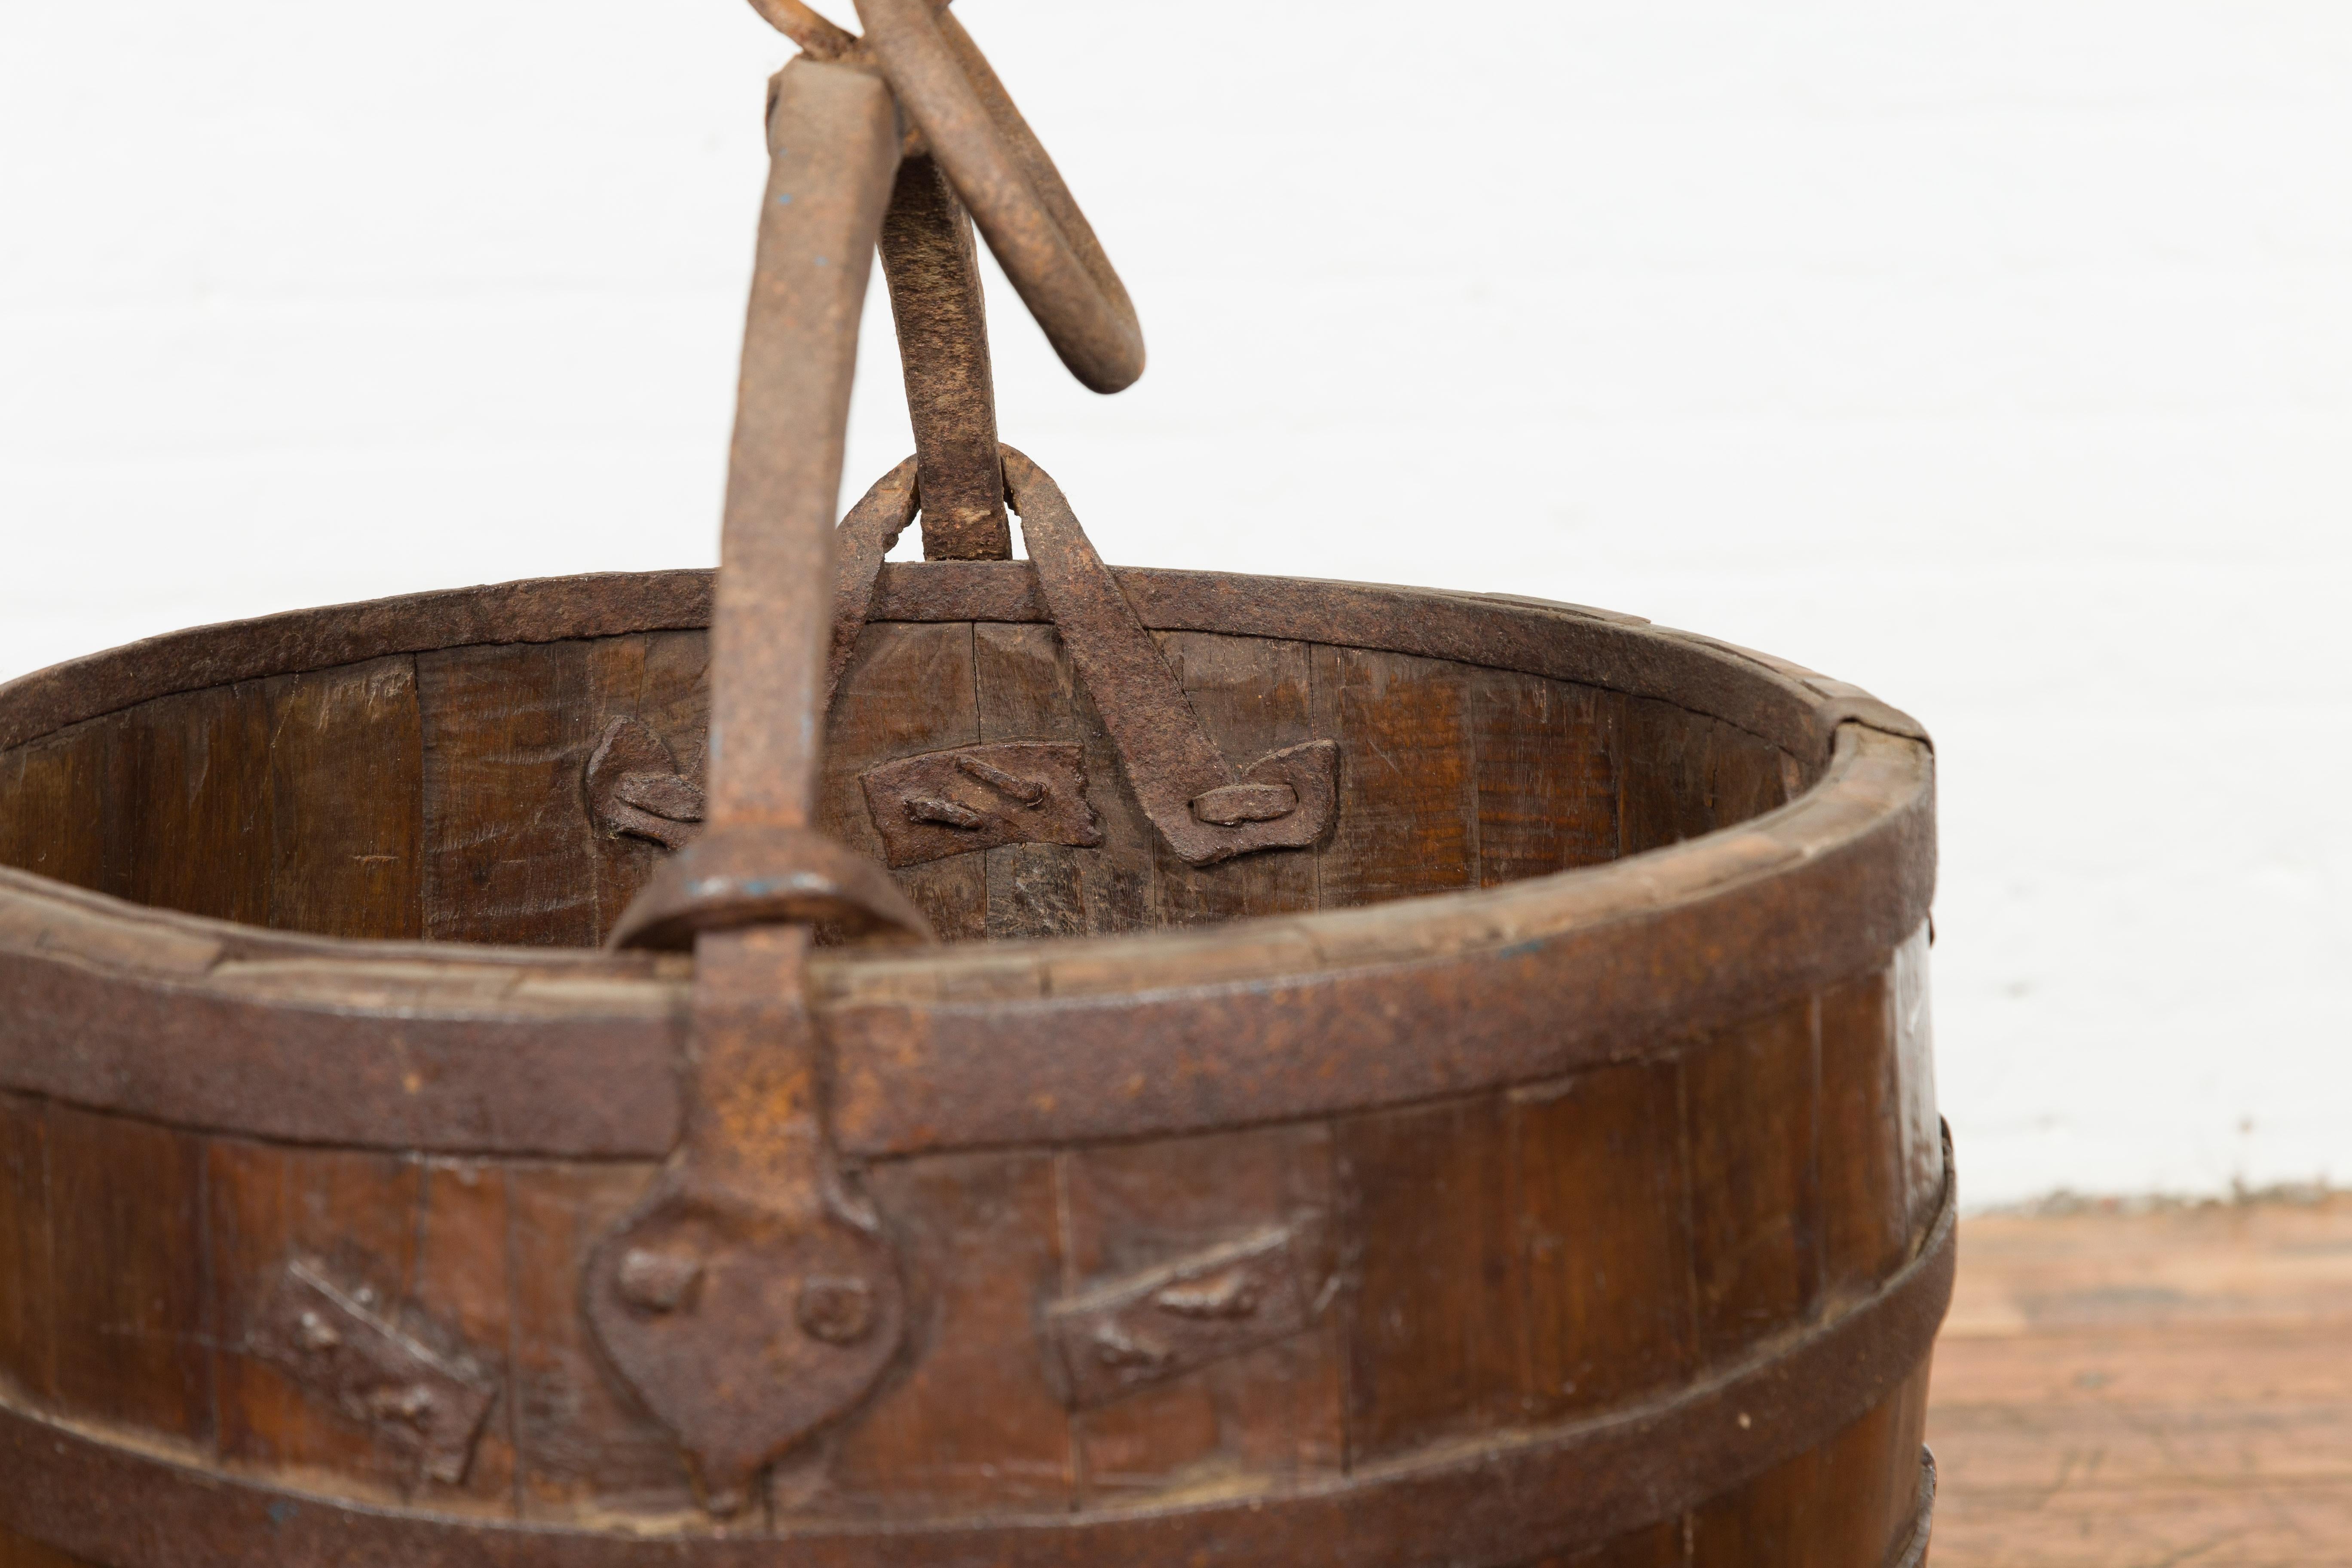 Chinese Qing Dynasty Period 19th Century Rice Bucket with Stand and Handle 9